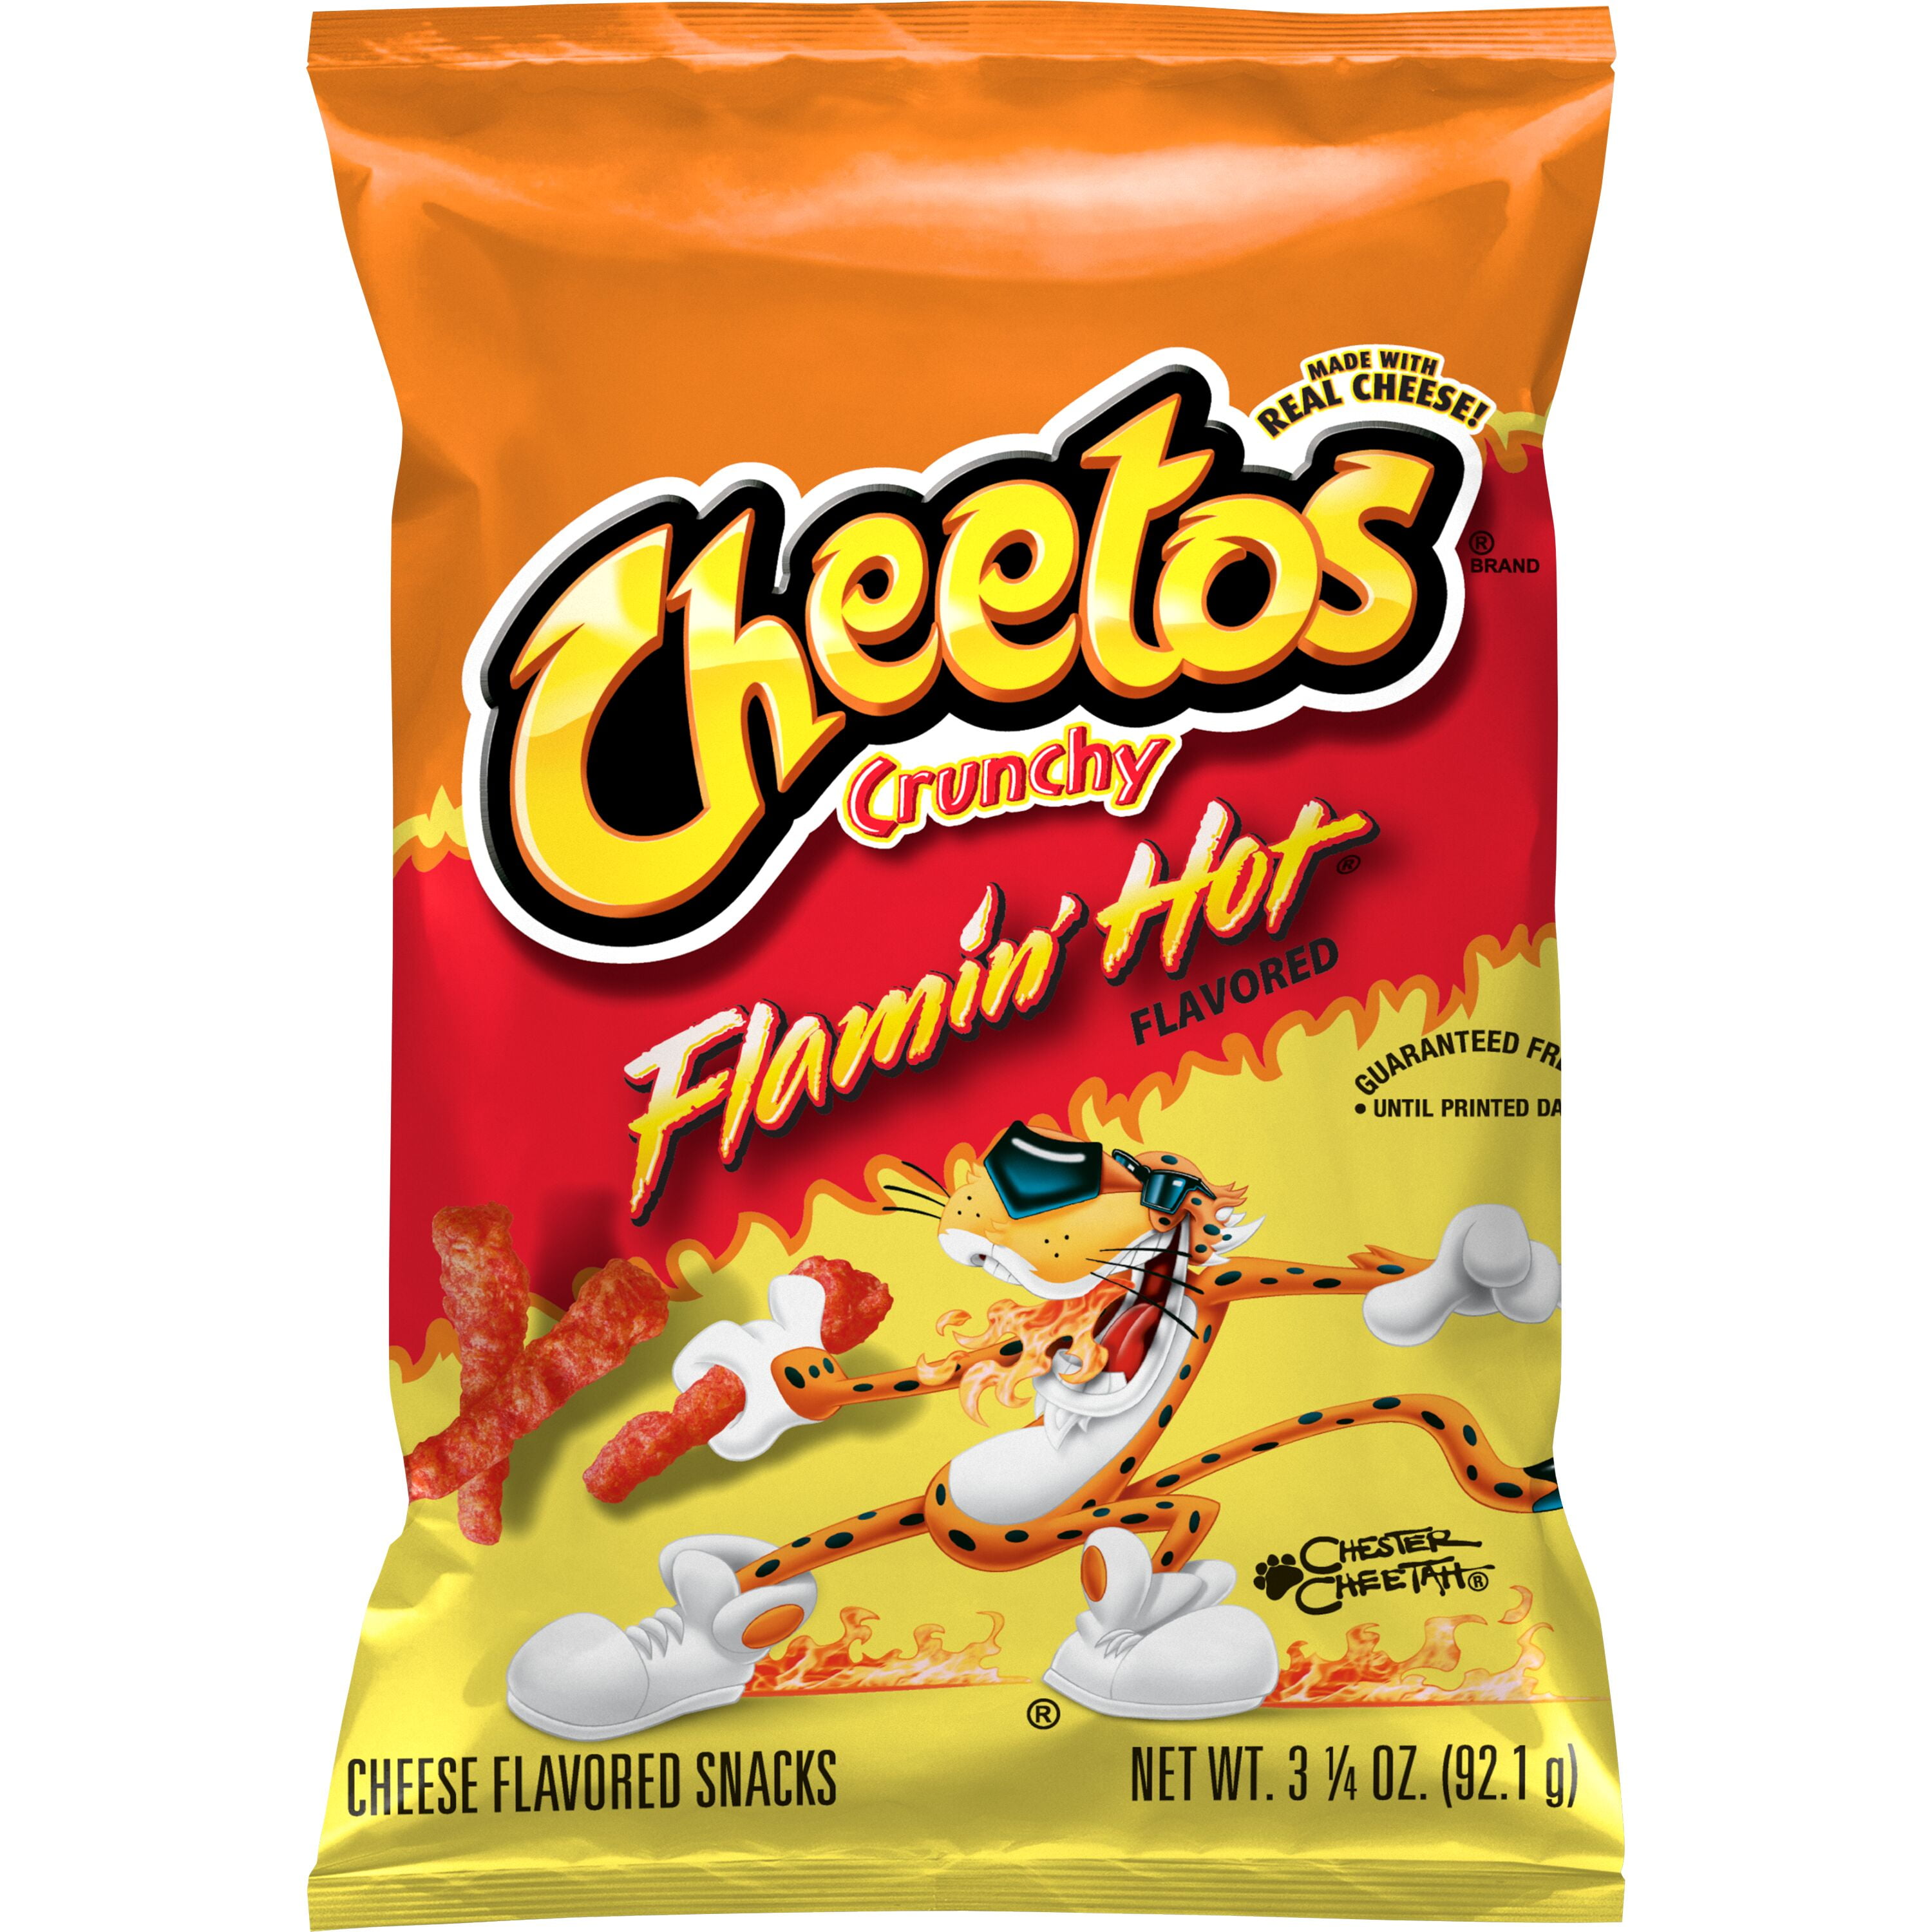 Cheetos Crunchy Flamin' Hot Cheese Flavored Snack Chips, 3.25 oz Bag 